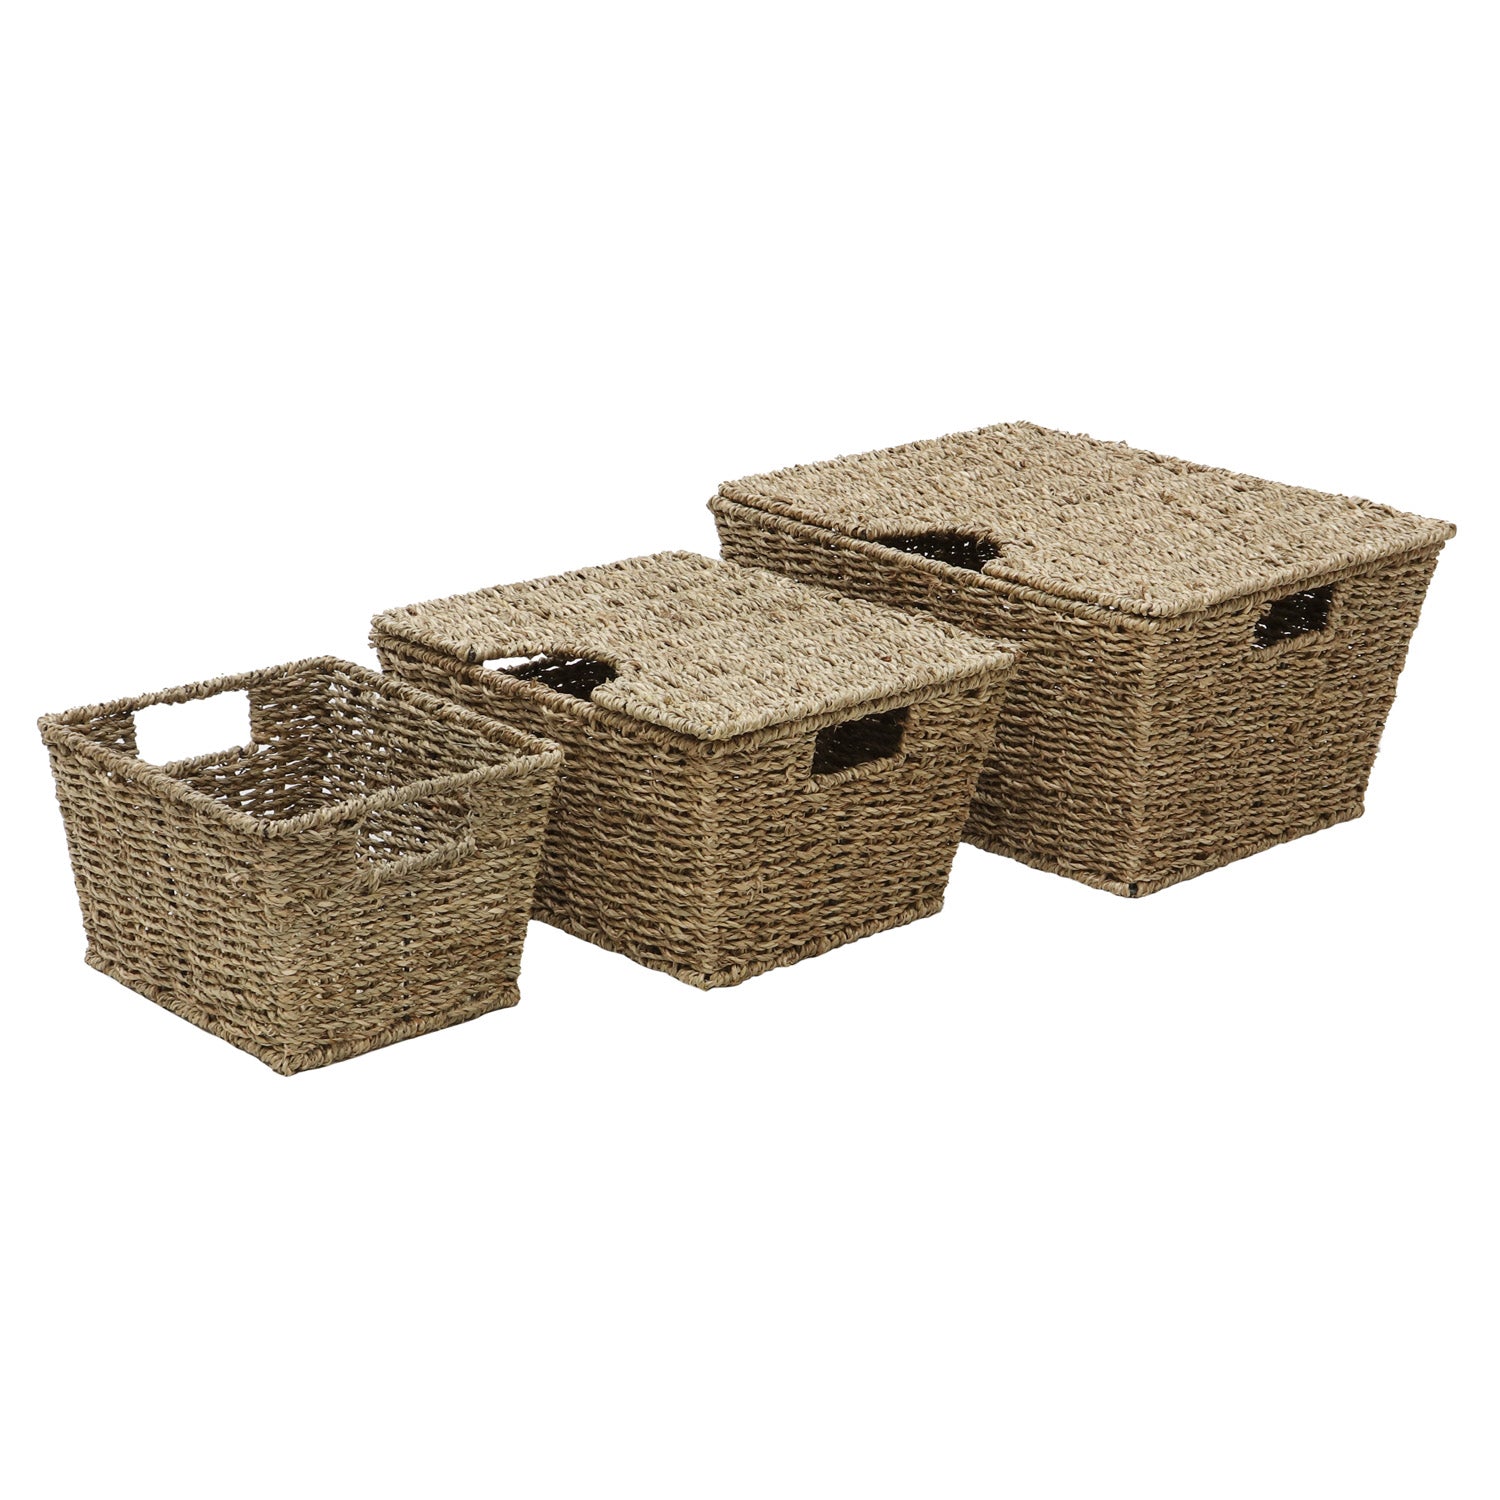 Seagrass Set Of 3 Rectangular Storage Baskets (2 With Lids